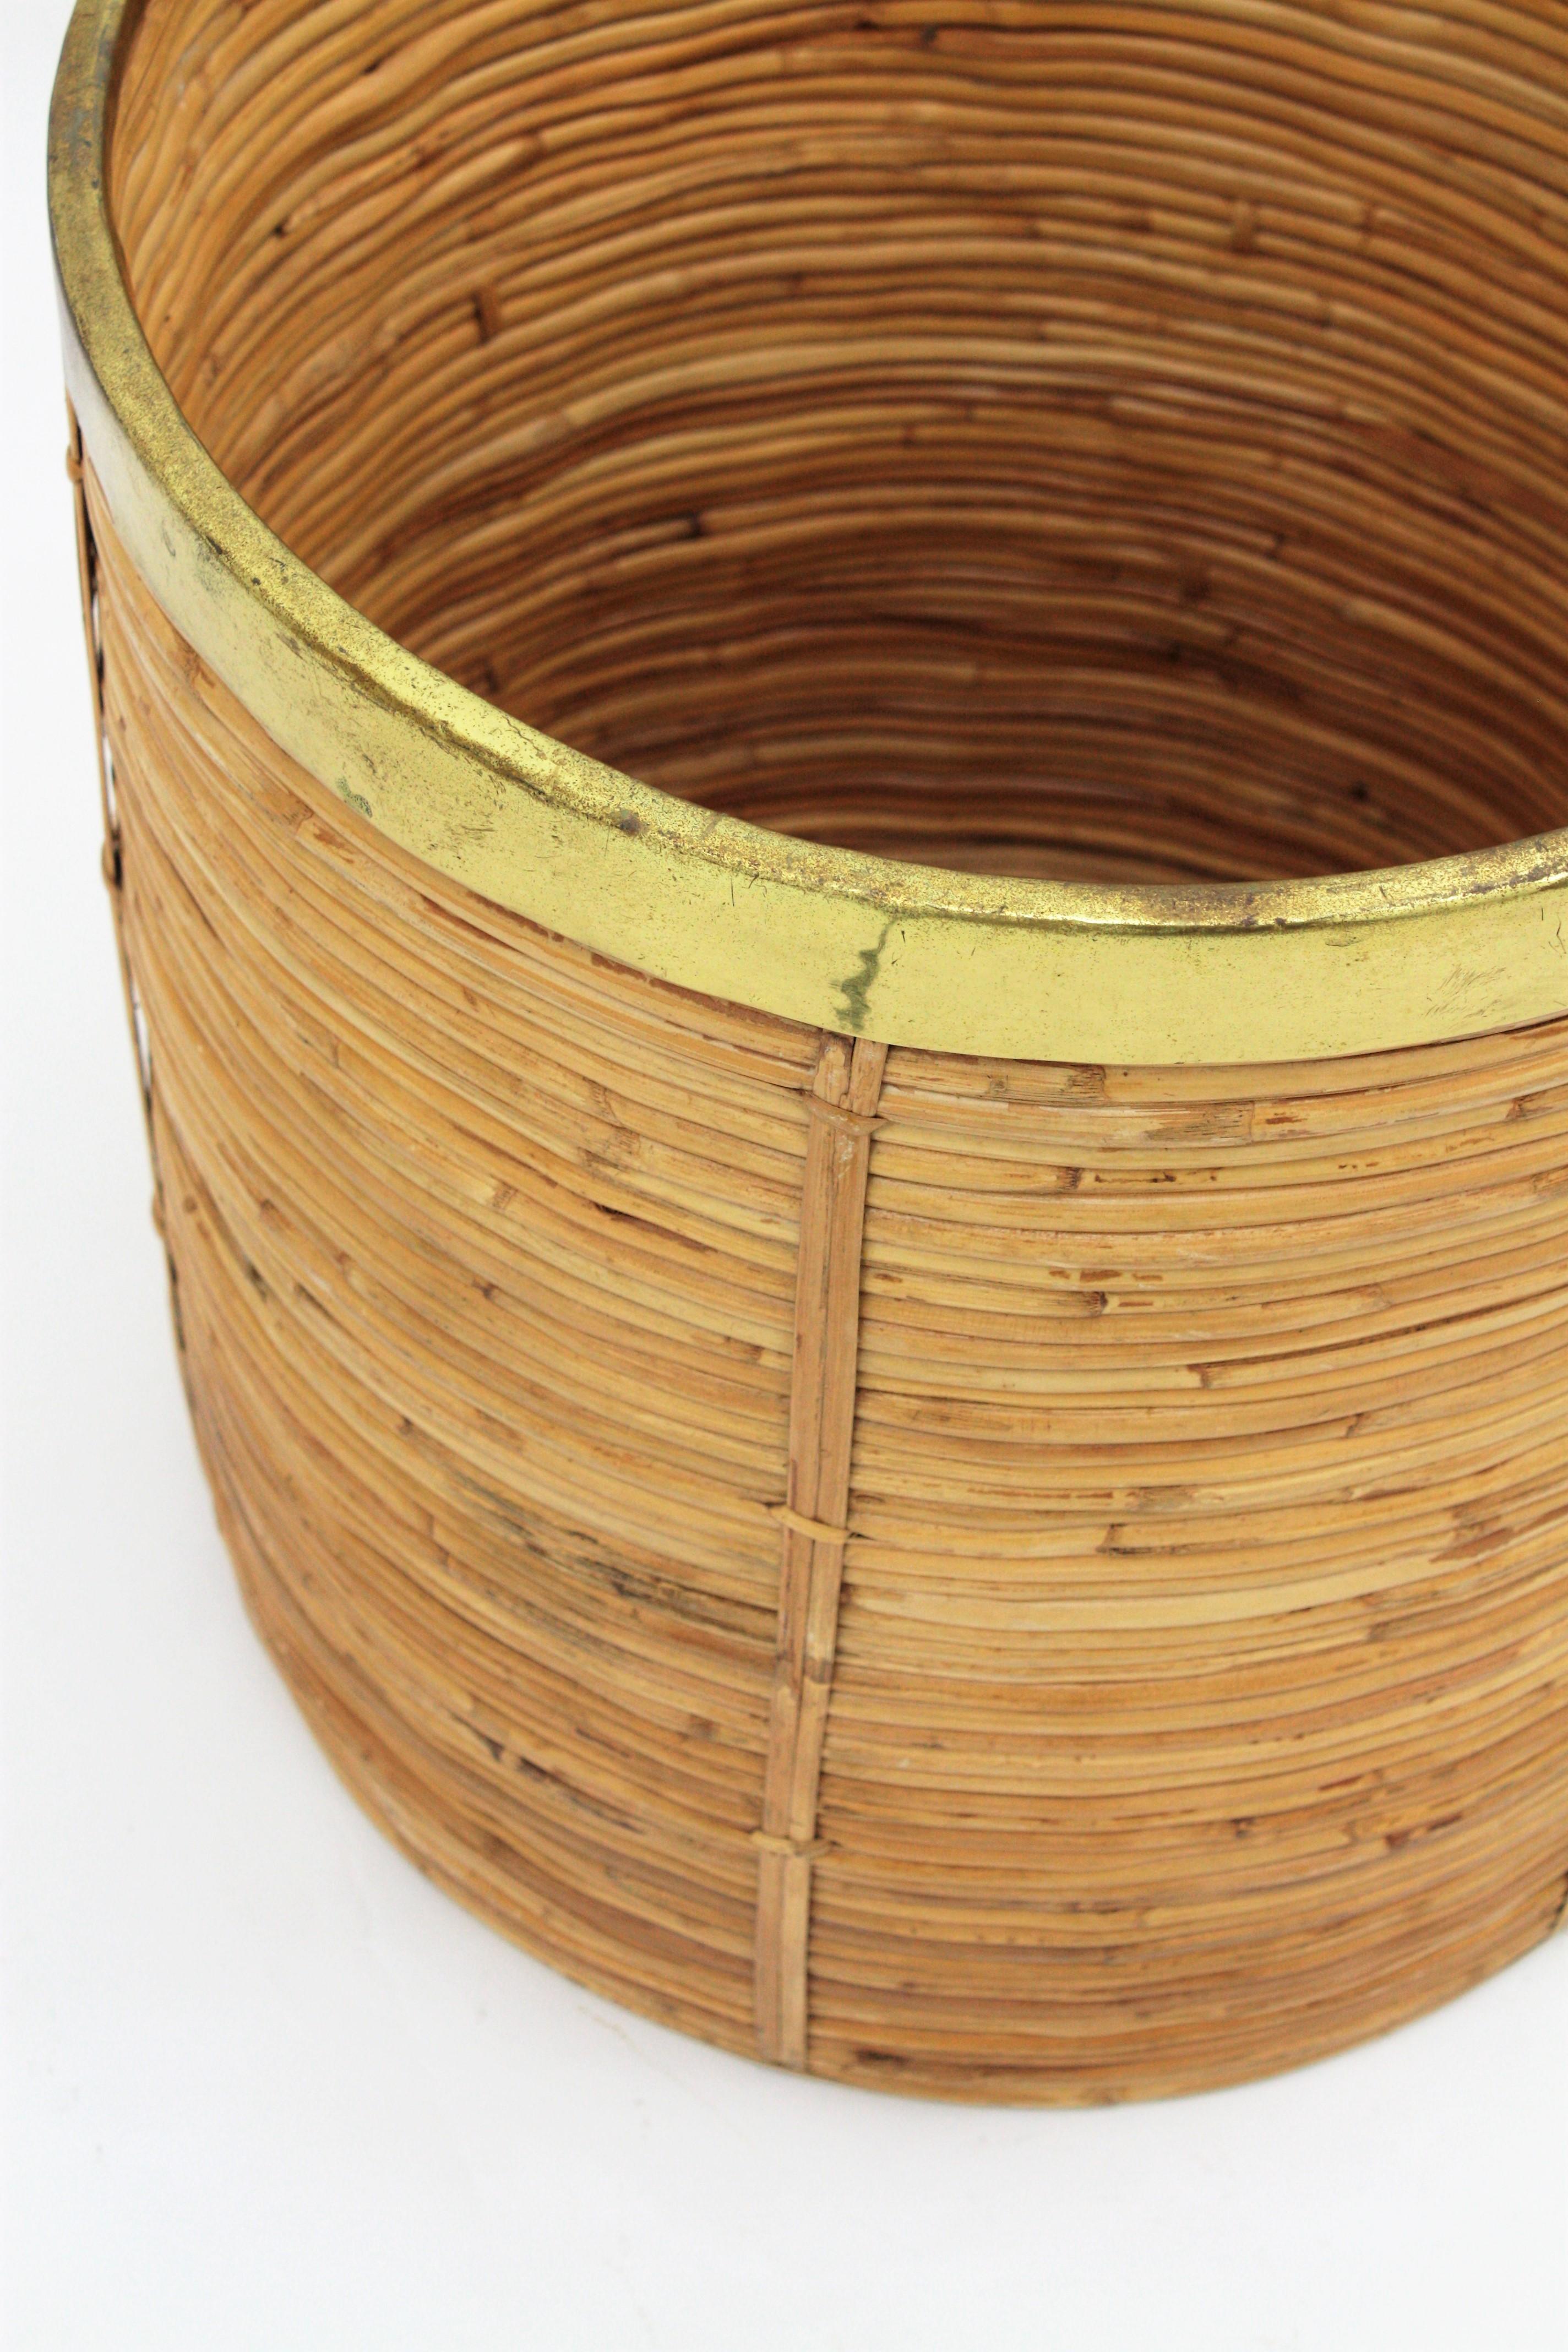 Large Midcentury Gabriella Crespi Style Brass and Rattan Bamboo Round Planter 1